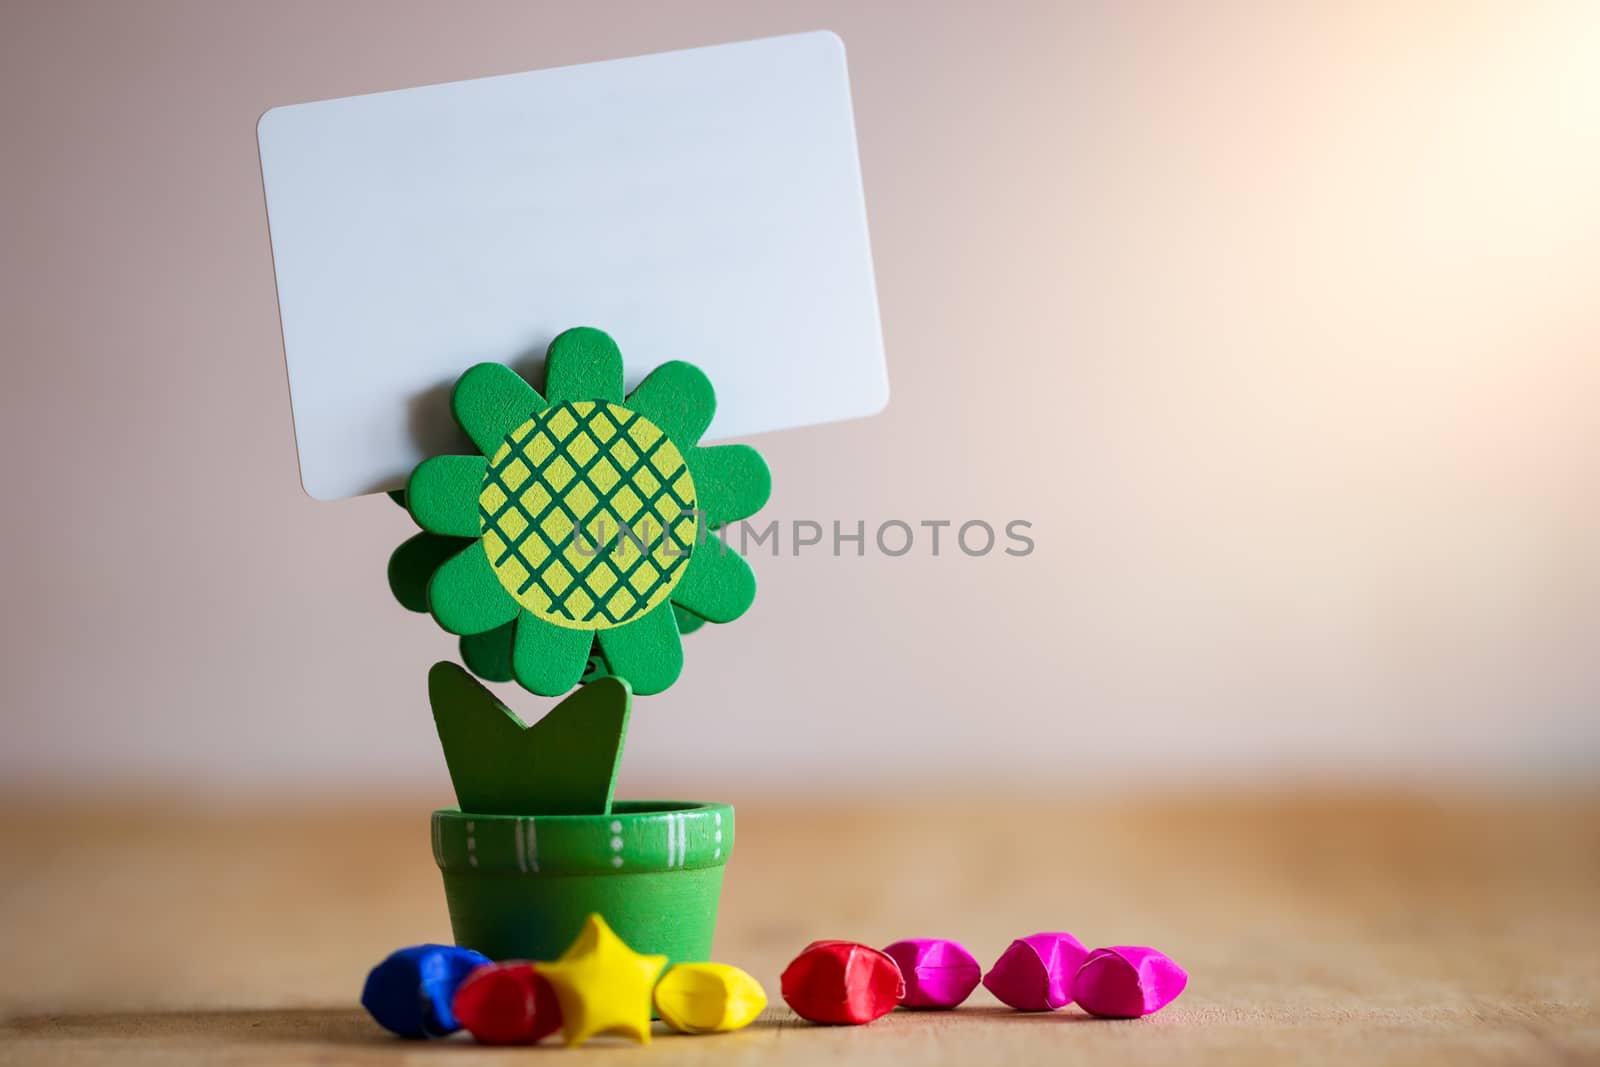 Clip holder card stand green sunflower shaped and multicolored paper stars on wooden table. White plastic blank card in morning sunlight.